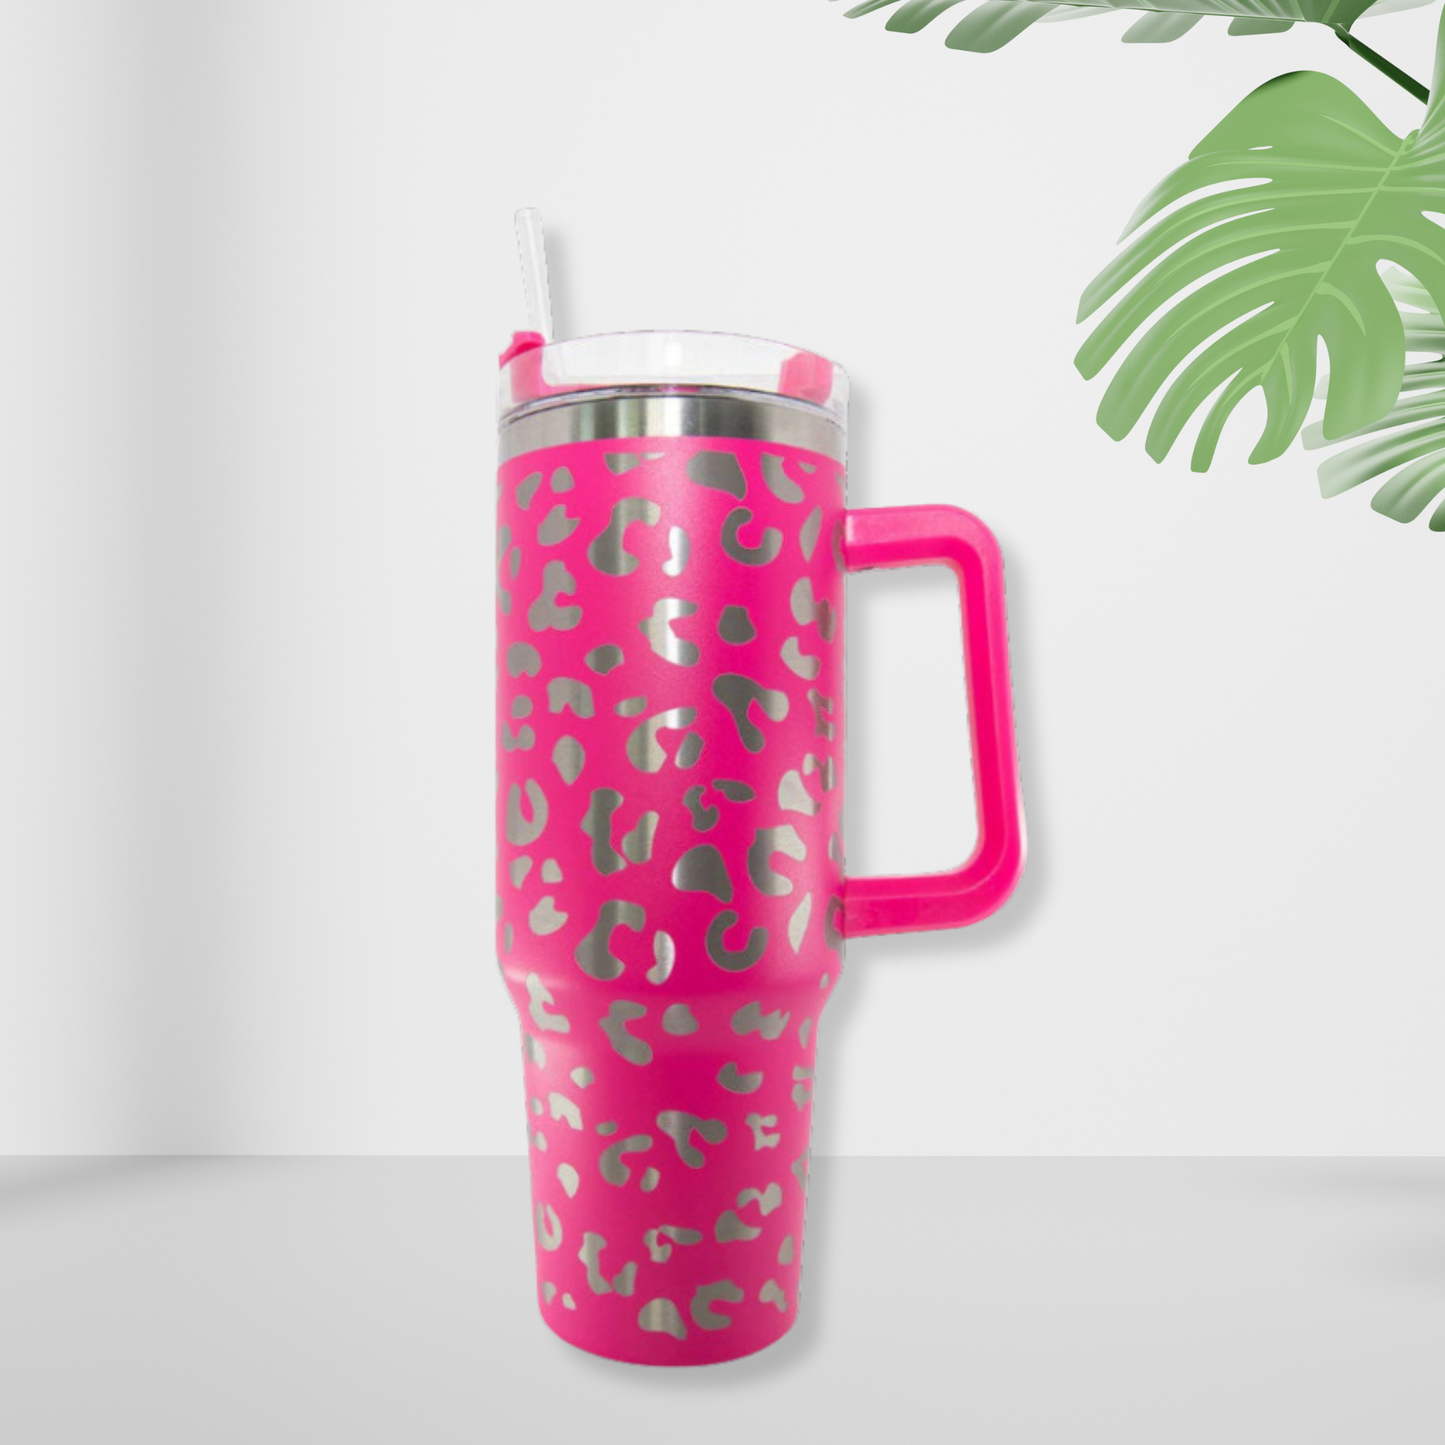 Hot Pink METALLIC Leopard 40oz Tumbler Cup with Handle